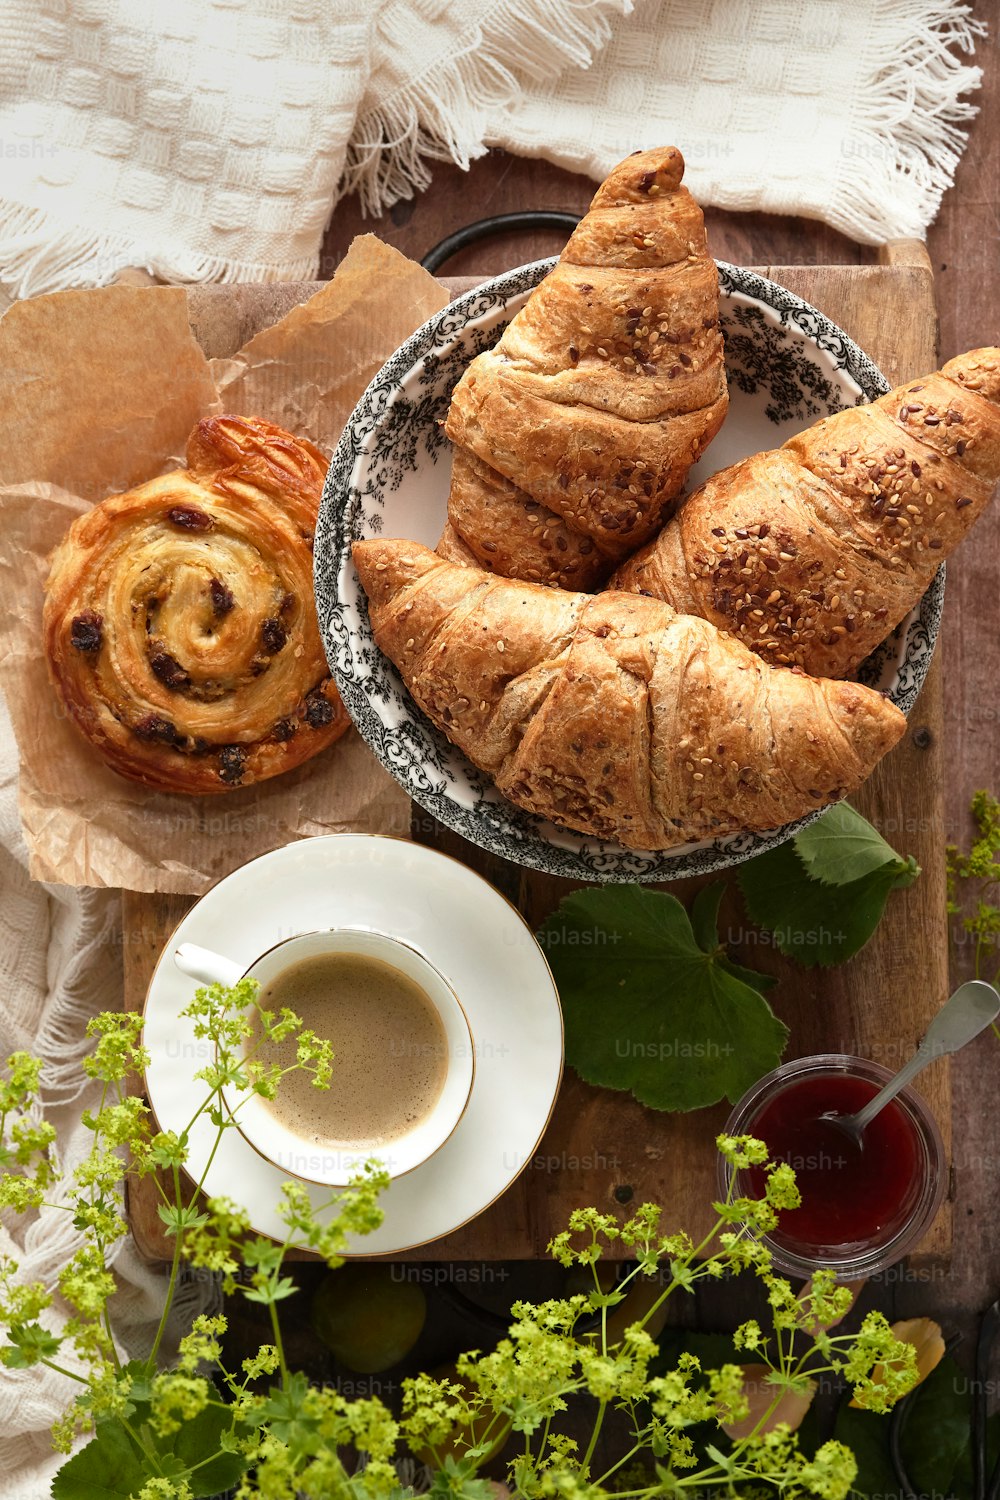 a table topped with pastries and a cup of coffee